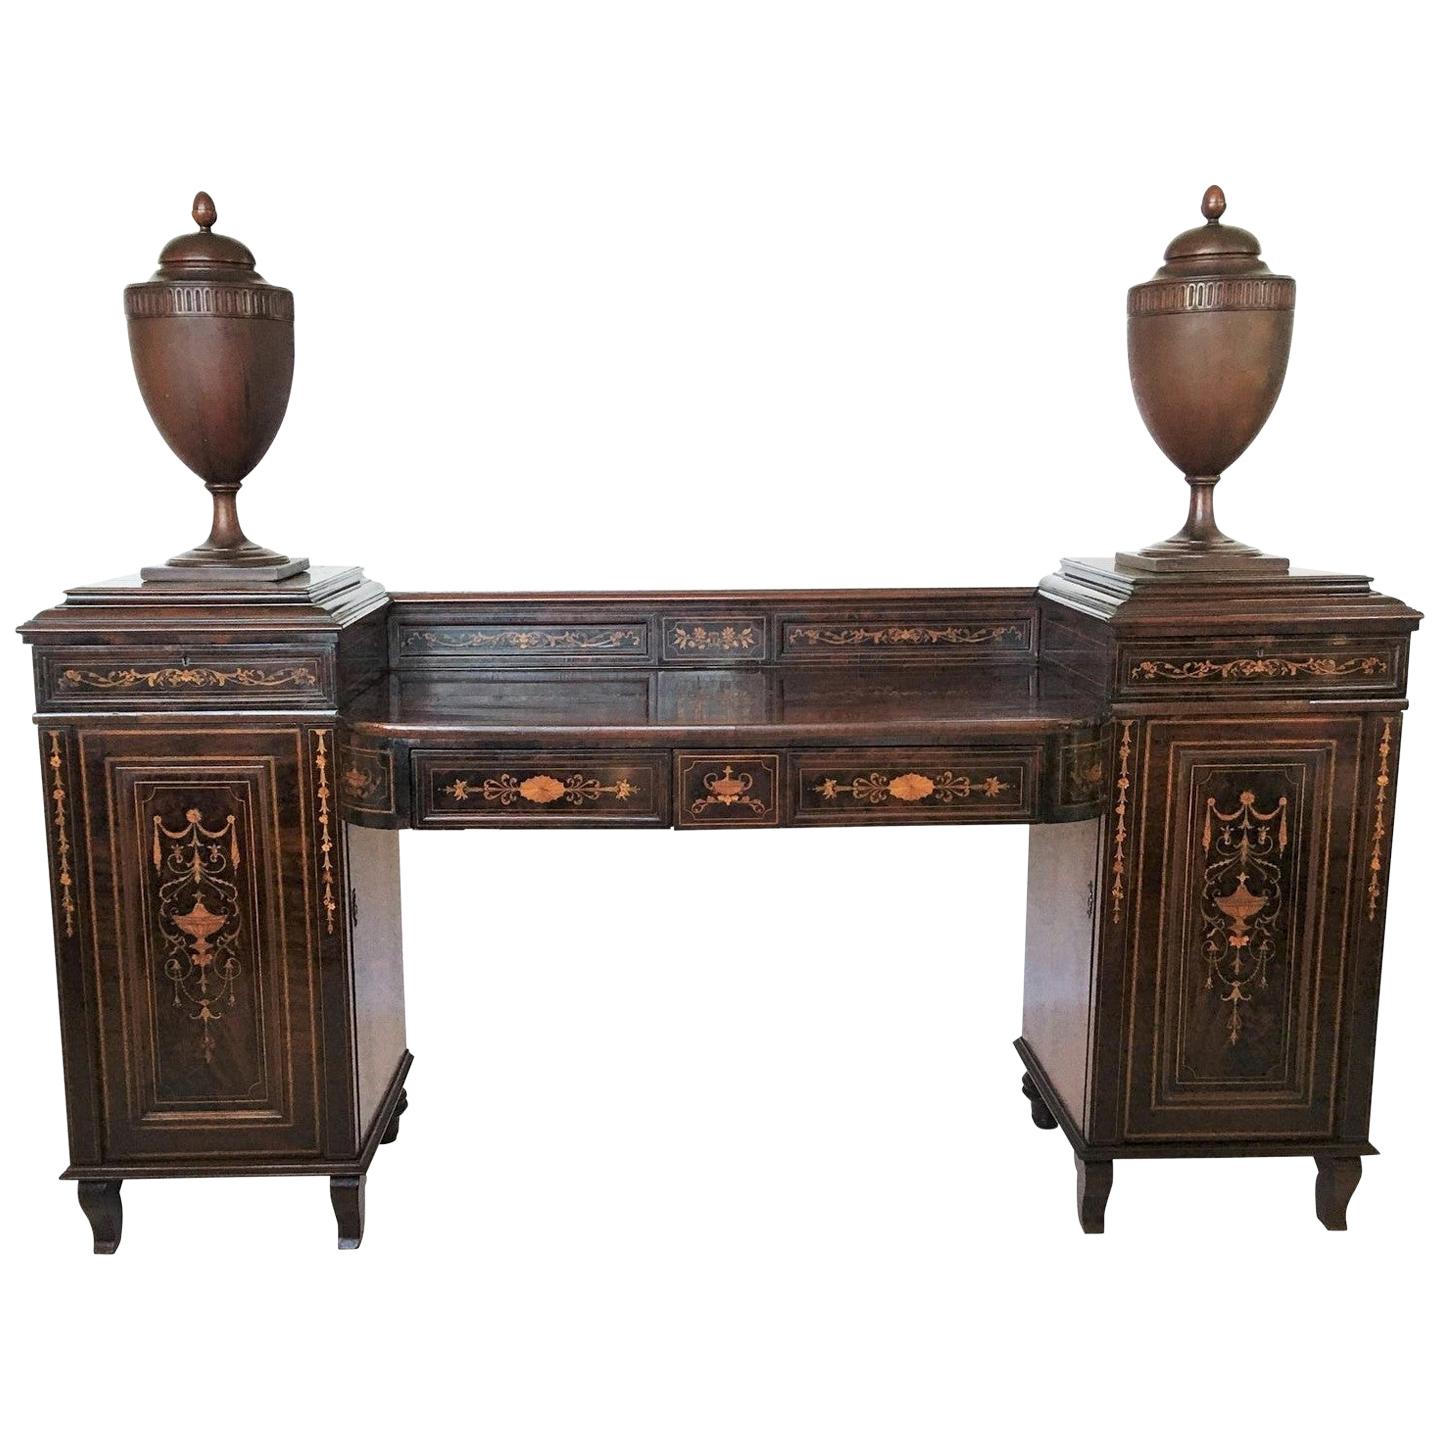 19th Century Regency Marquetry Inlaid Rosewood Sideboard with Cutlery Urns For Sale